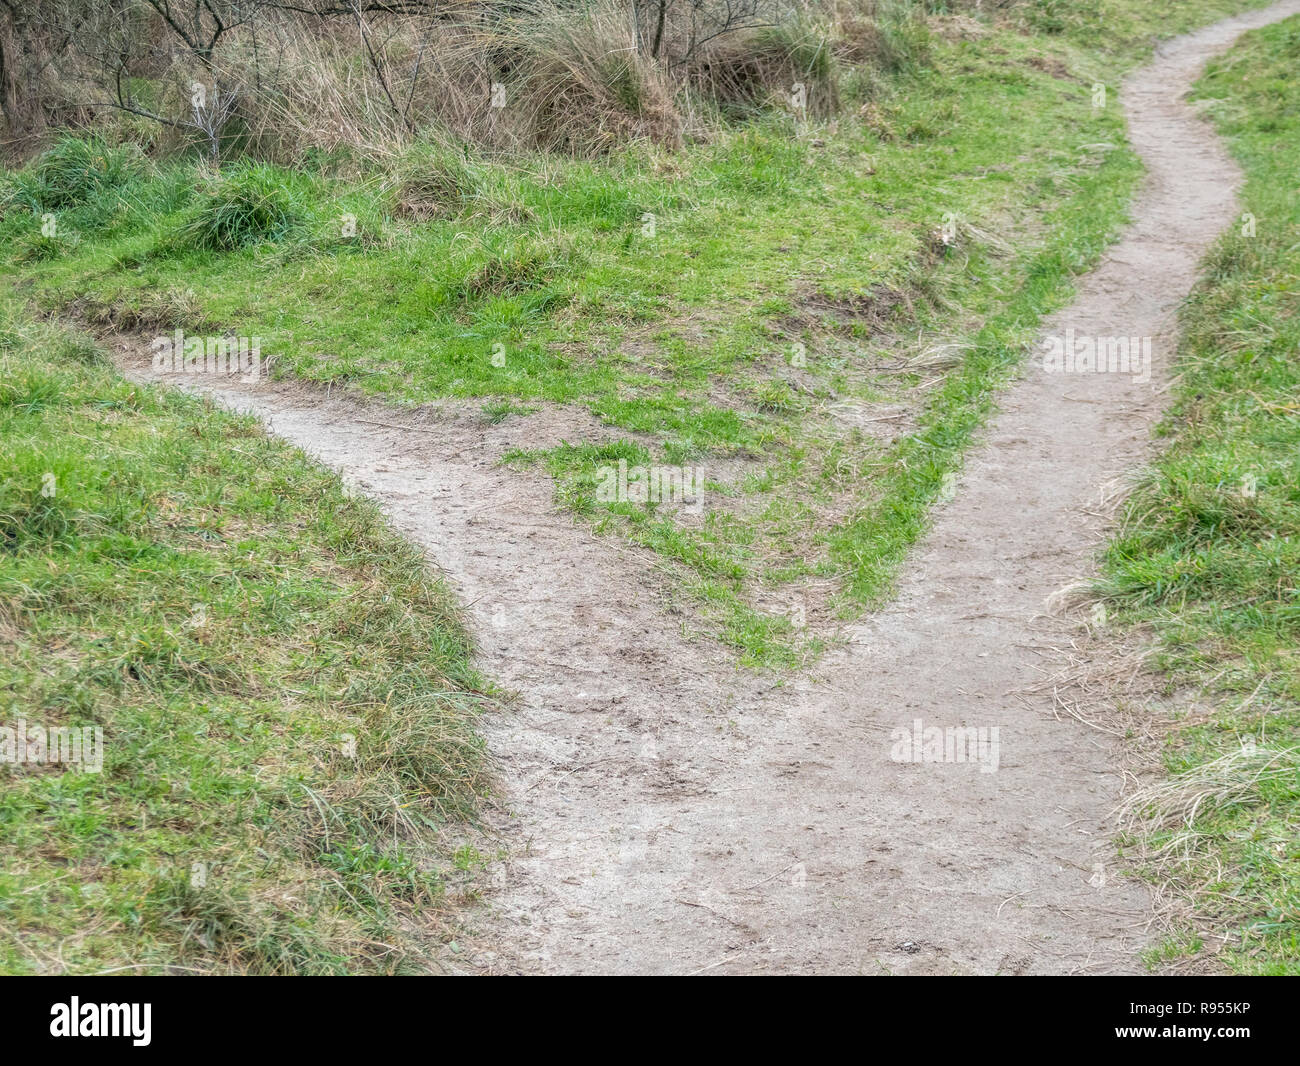 Forking footpath - metaphor for diverging ideas, divided, different directions, career path change, changes in circumstances, direction change Stock Photo